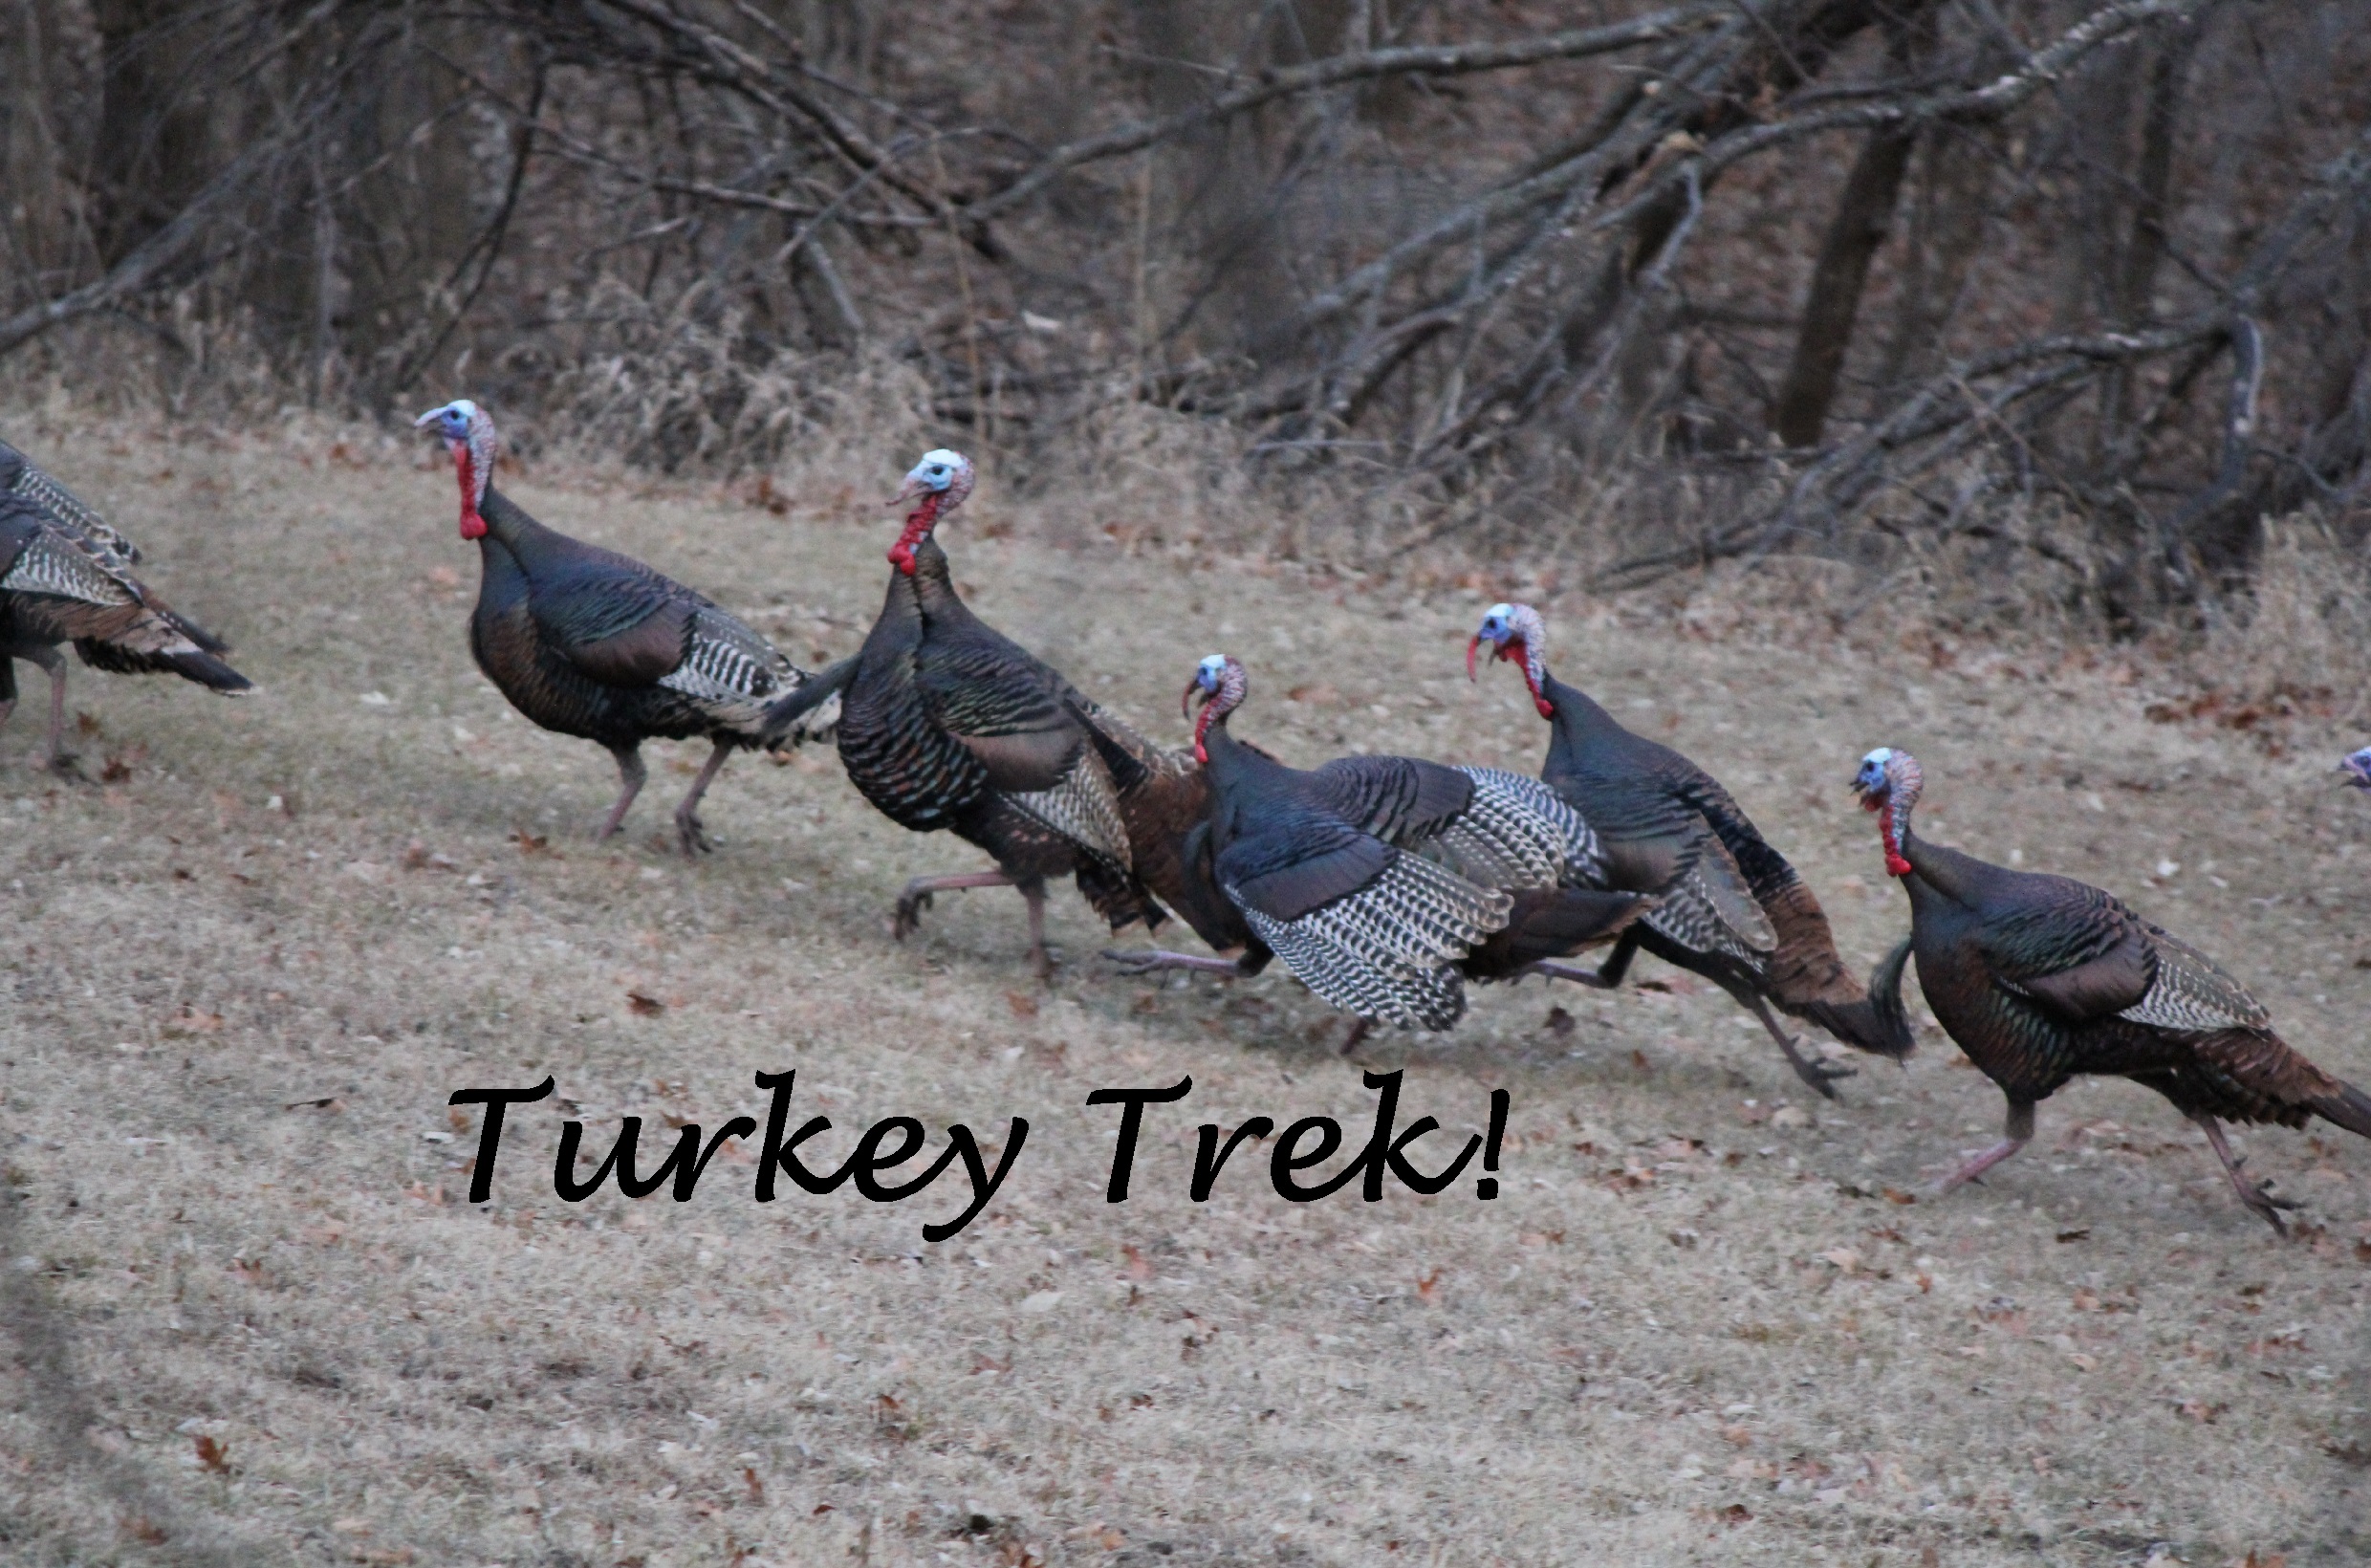 a picture of turkeys with the black text, "Turkey Trek!".